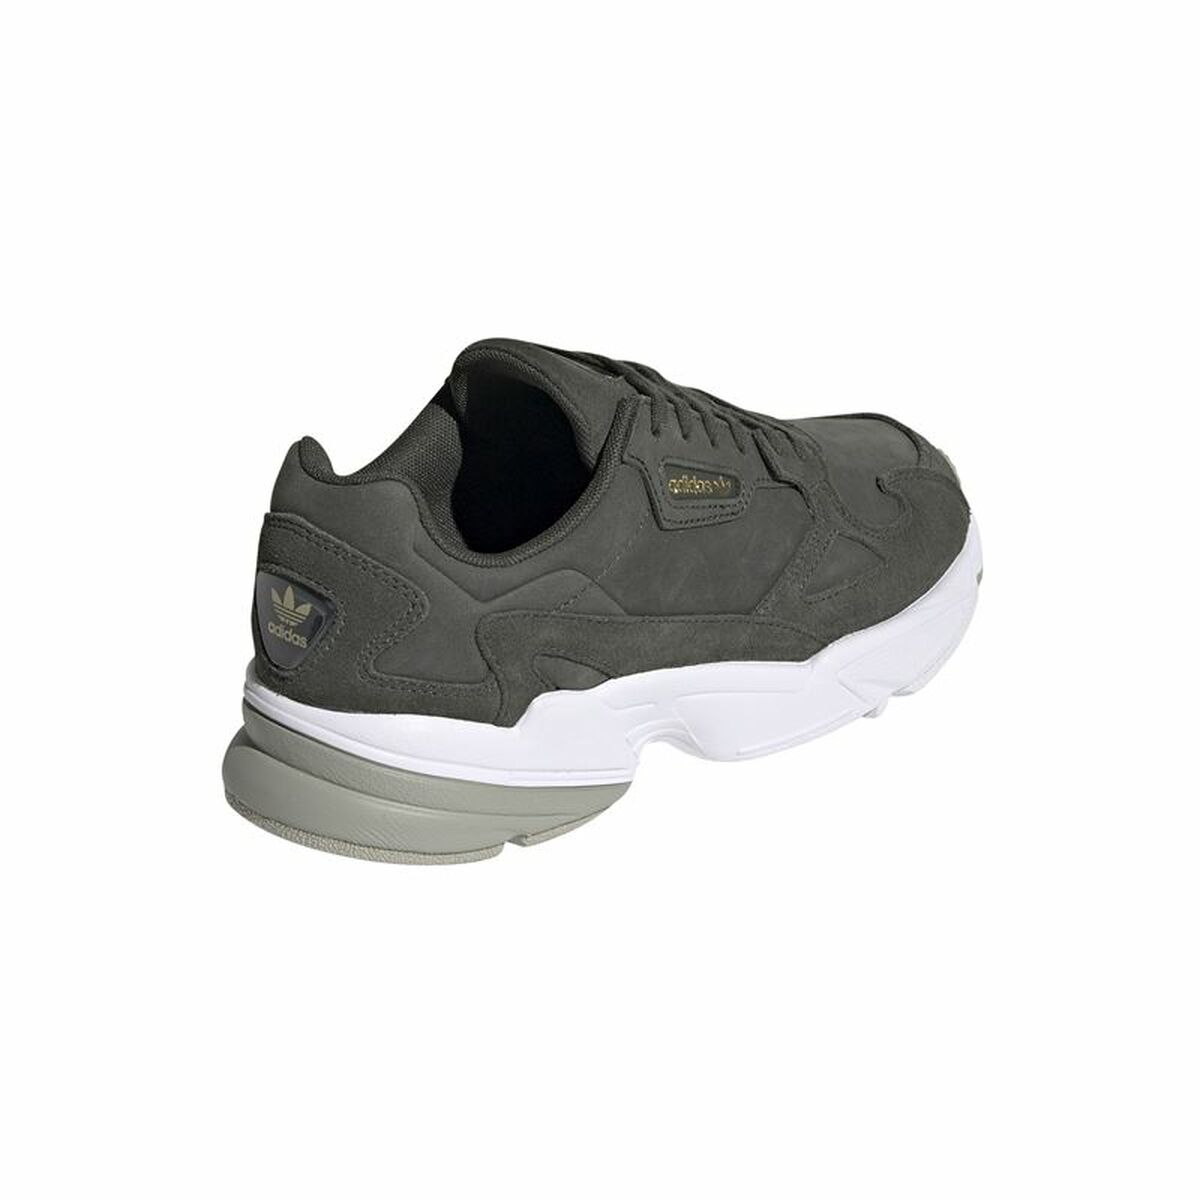 Sports Trainers for Women Adidas Originals Falcon Legend Olive